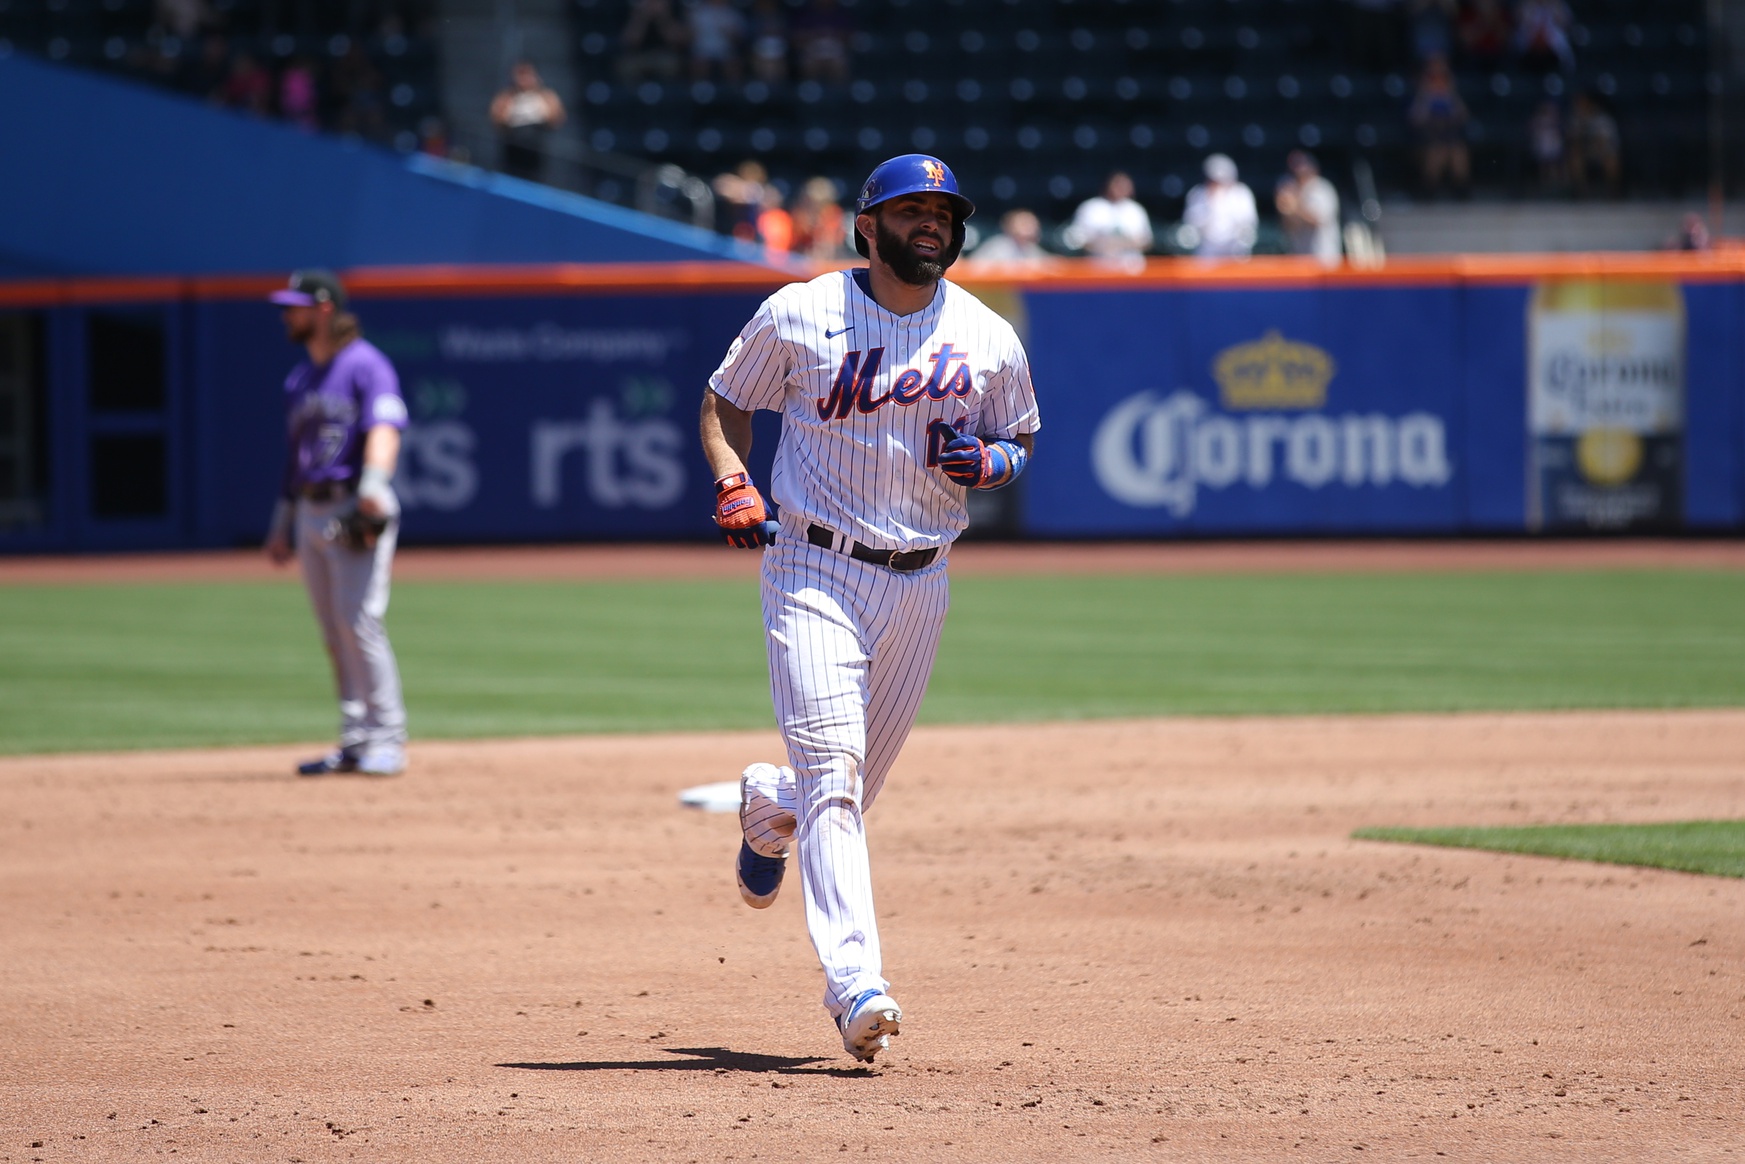 Mets’ Second Base Defense Trending In Right Direction